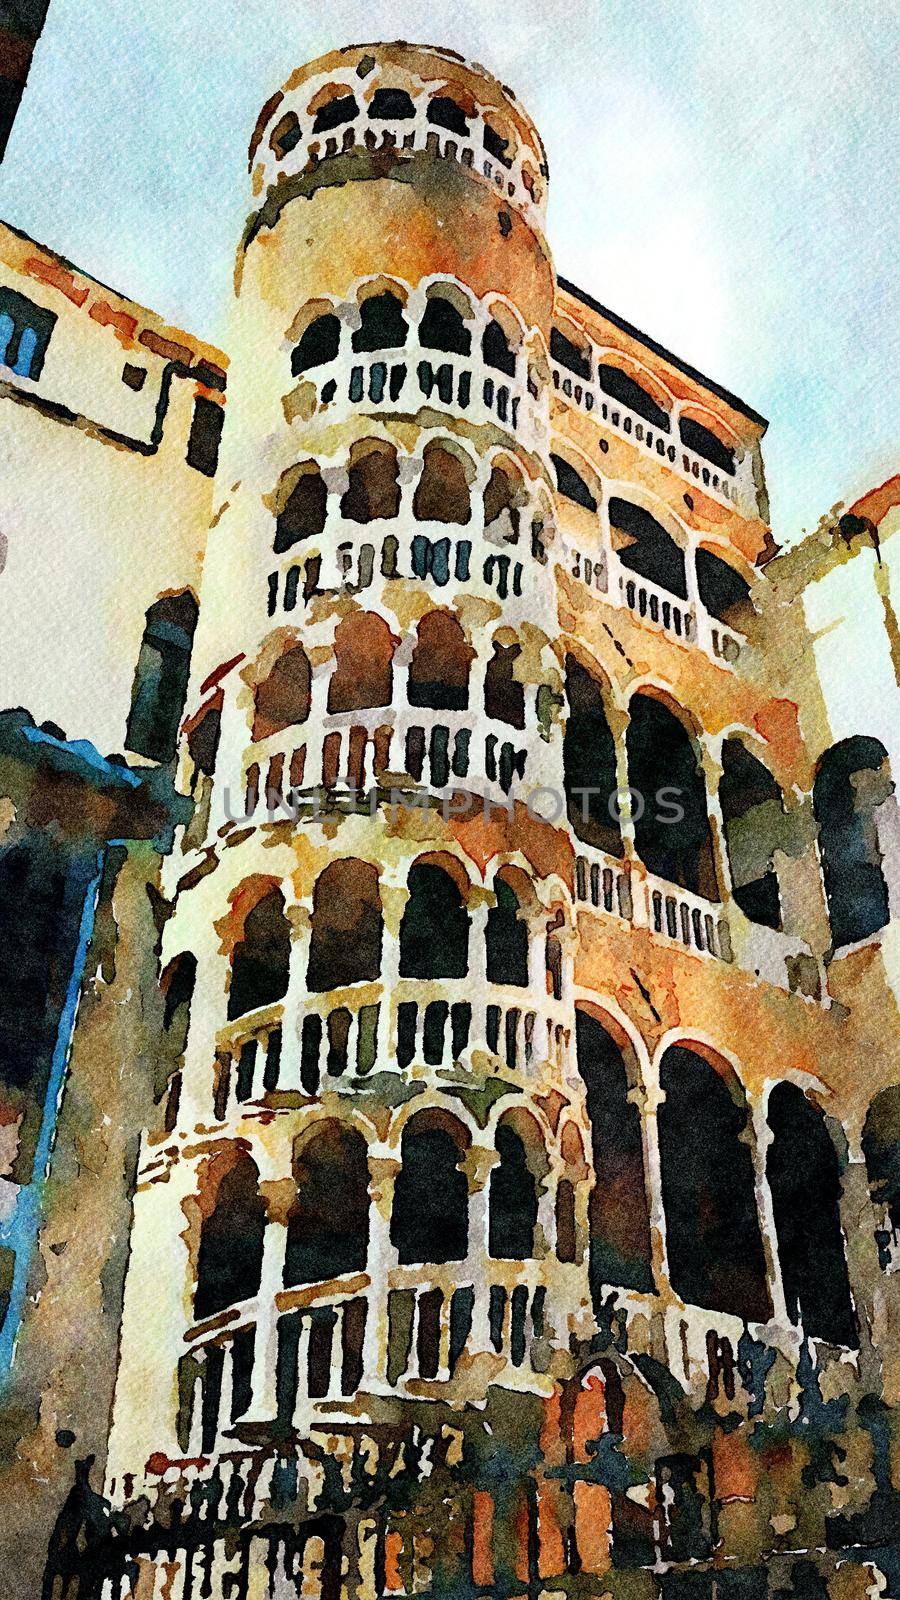 Watercolor that represents the glimpse of a historic building with tower and arches in the center of Venice